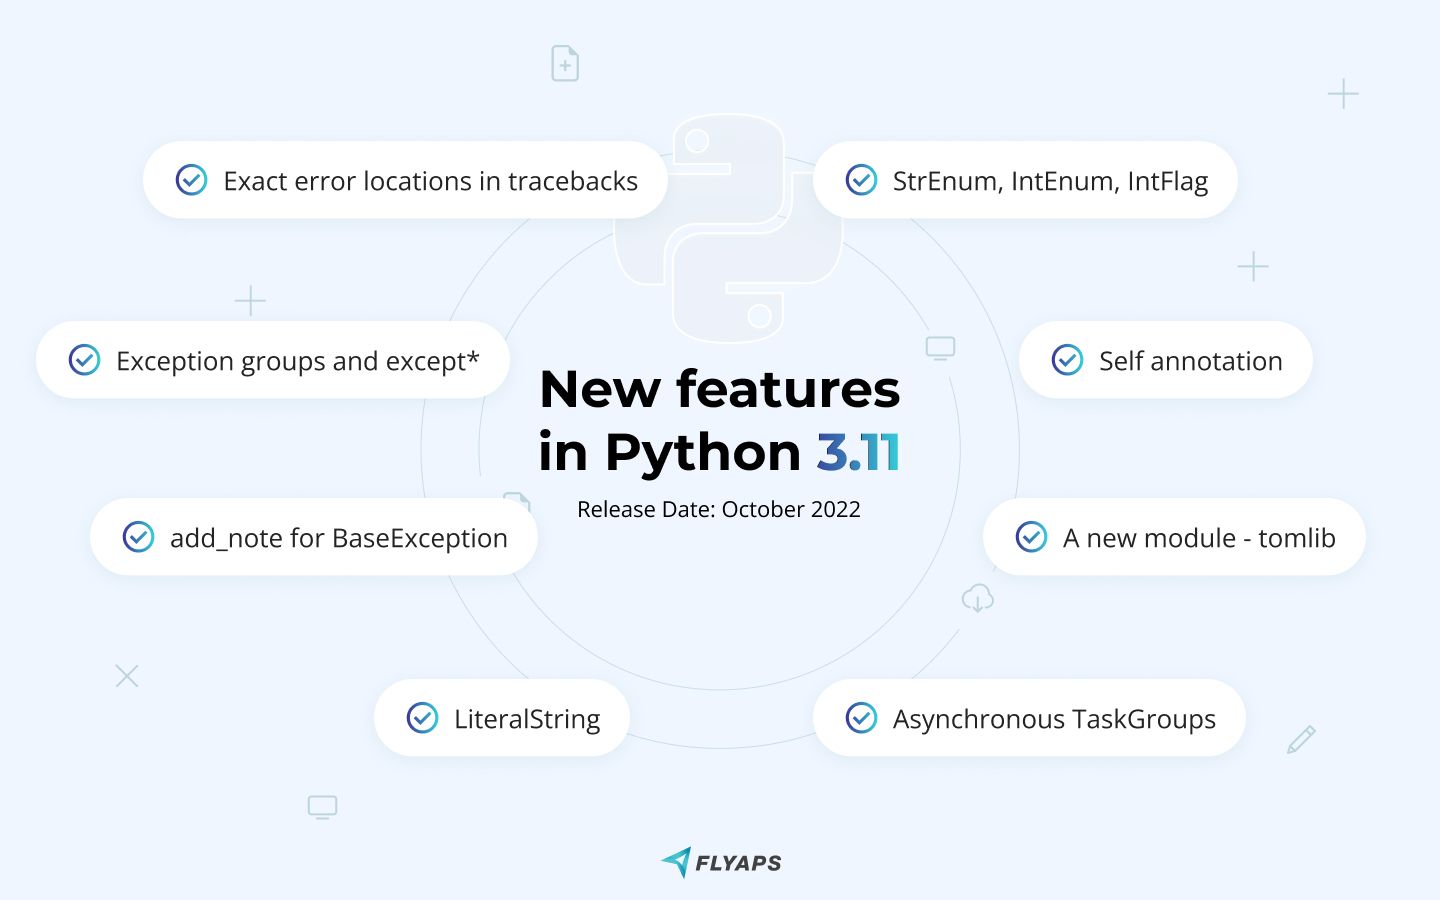 New features in Python 3.11